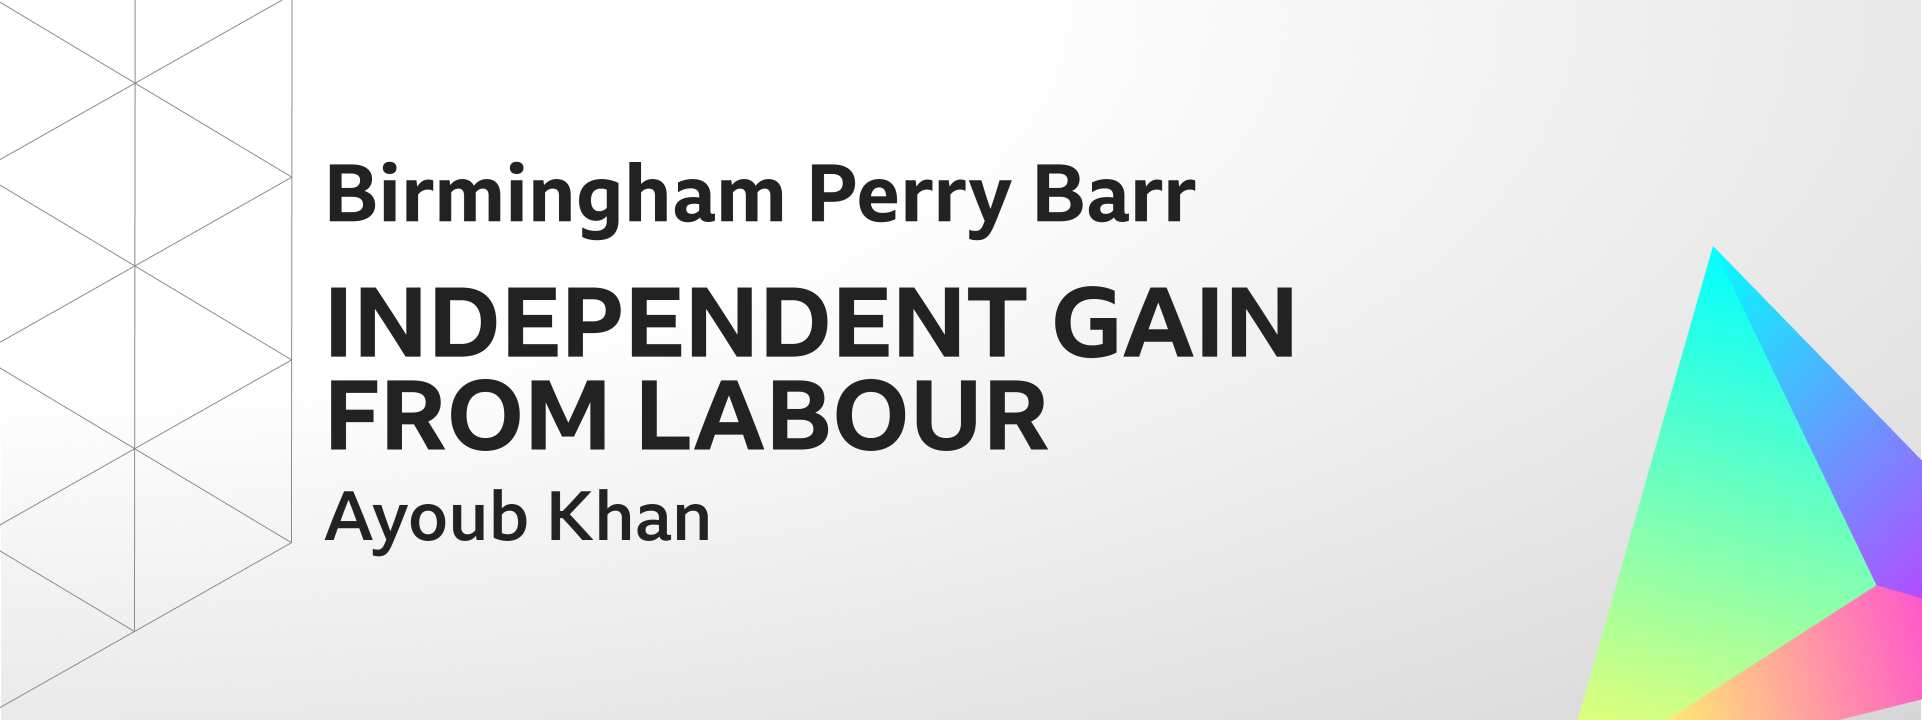 Graphic showing Independent gains Birmingham Perry Barr from Labour. The winning candidate was Ayoub Khan.